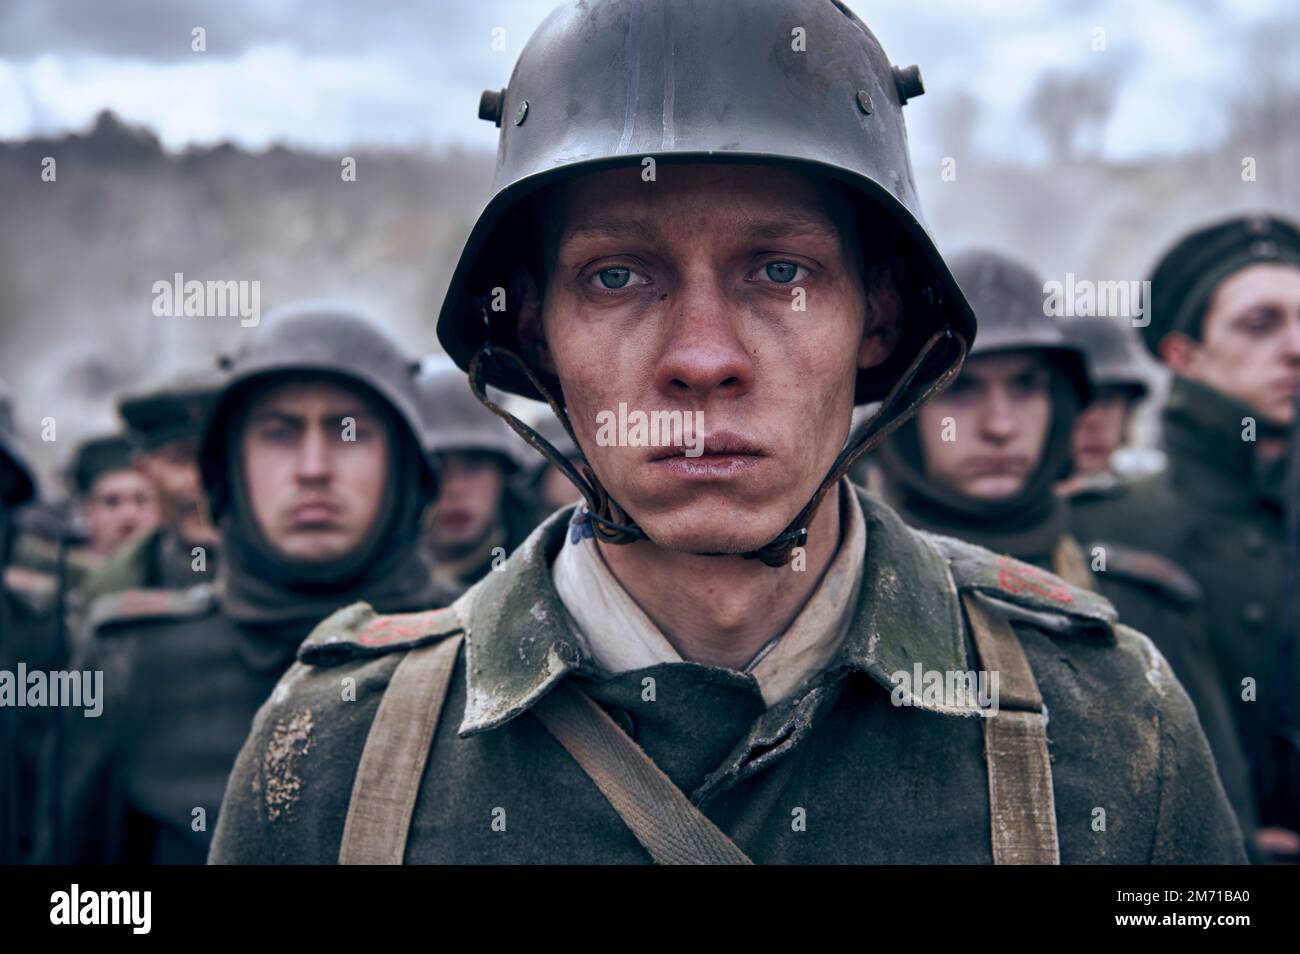 RELEASE DATE: October 28, 2022. TITLE: All Quiet On The Wester Front. STUDIO: Netflix. DIRECTOR: Edward Berger. PLOT: A young German soldier's terrifying experiences and distress on the western front during World War I. STARRING: FELIX KAMMERER as Paul Baumer. (Credit Image: © Netflix/Entertainment Pictures) Stock Photo